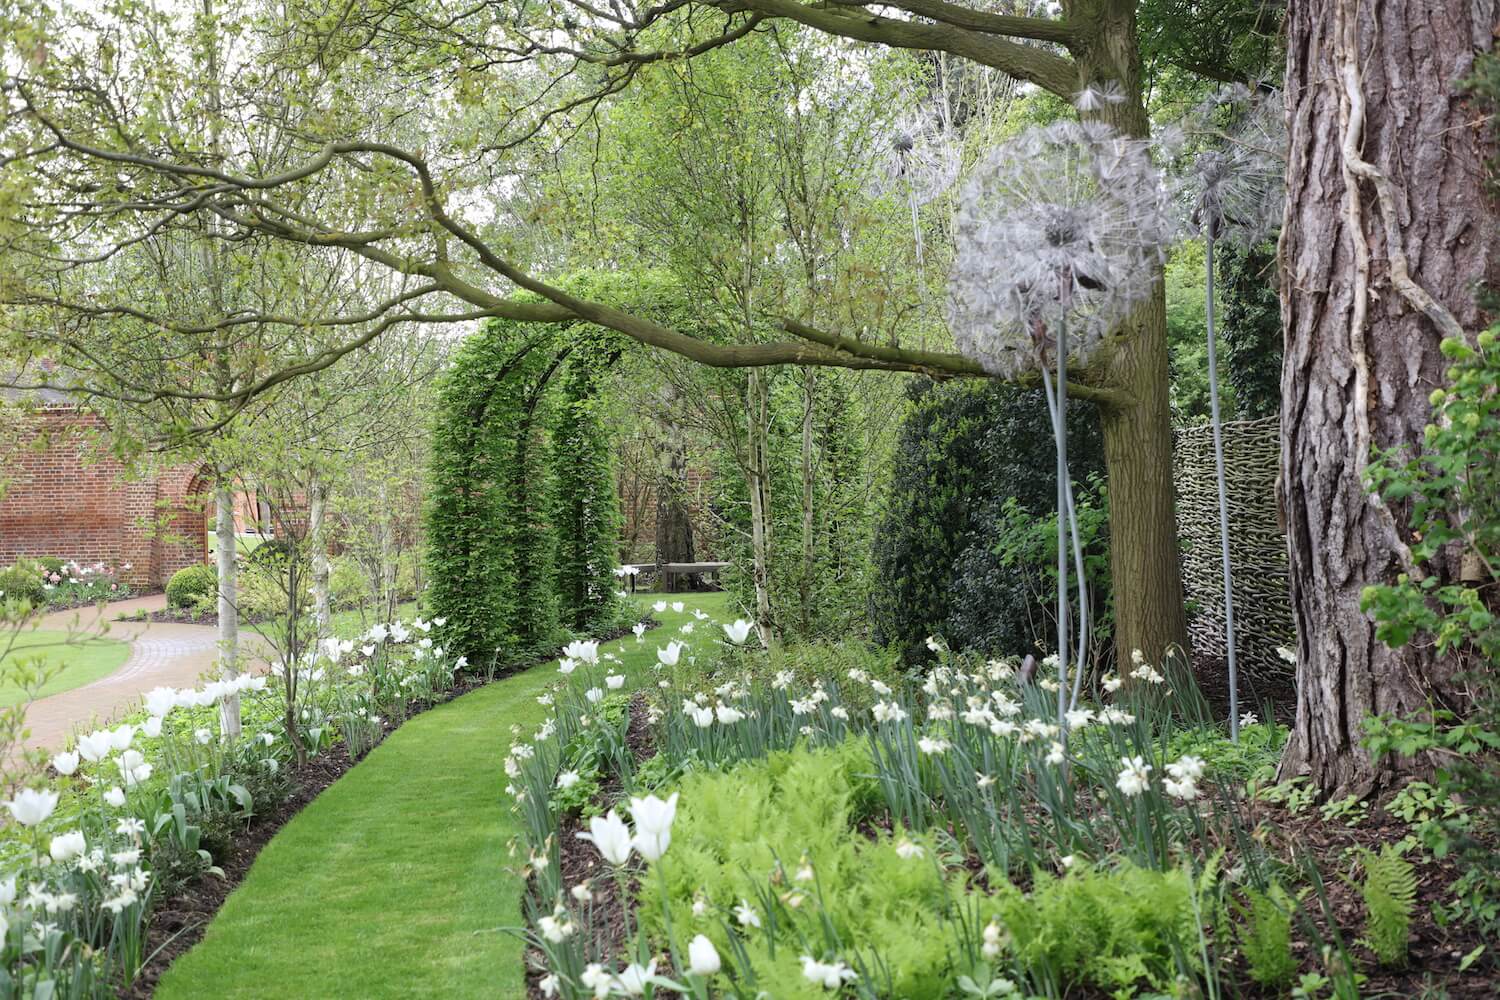 hornbeam archways with a lawn path and giant metal flower sculptures in a Oxford garden design